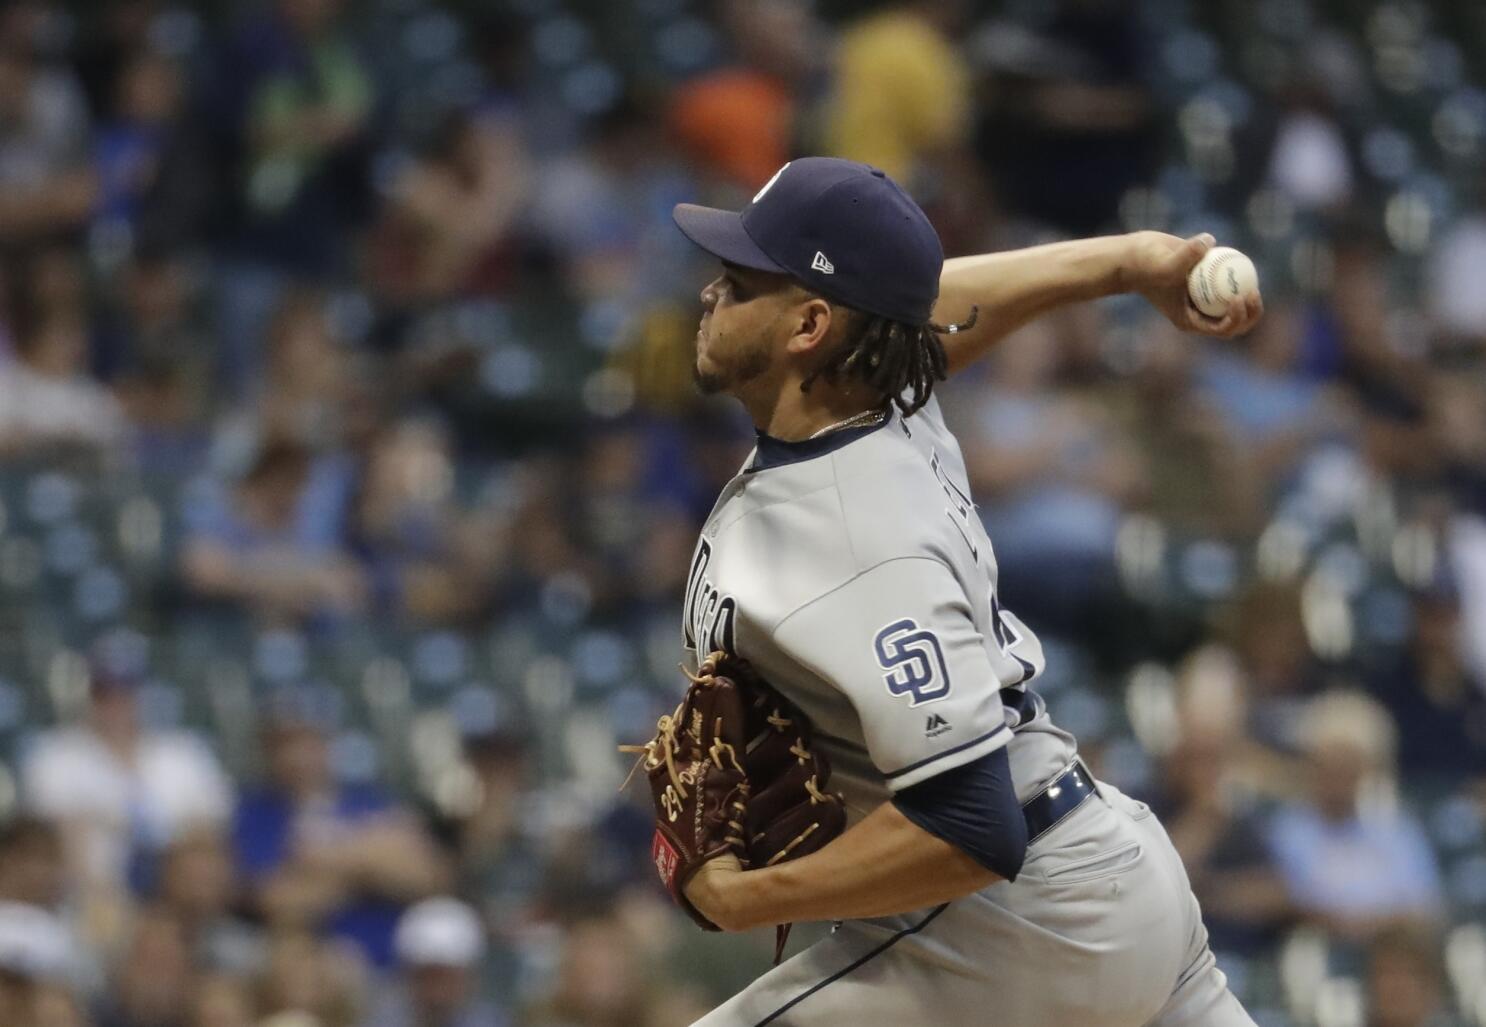 Padres' Paddack and Peavy very similar